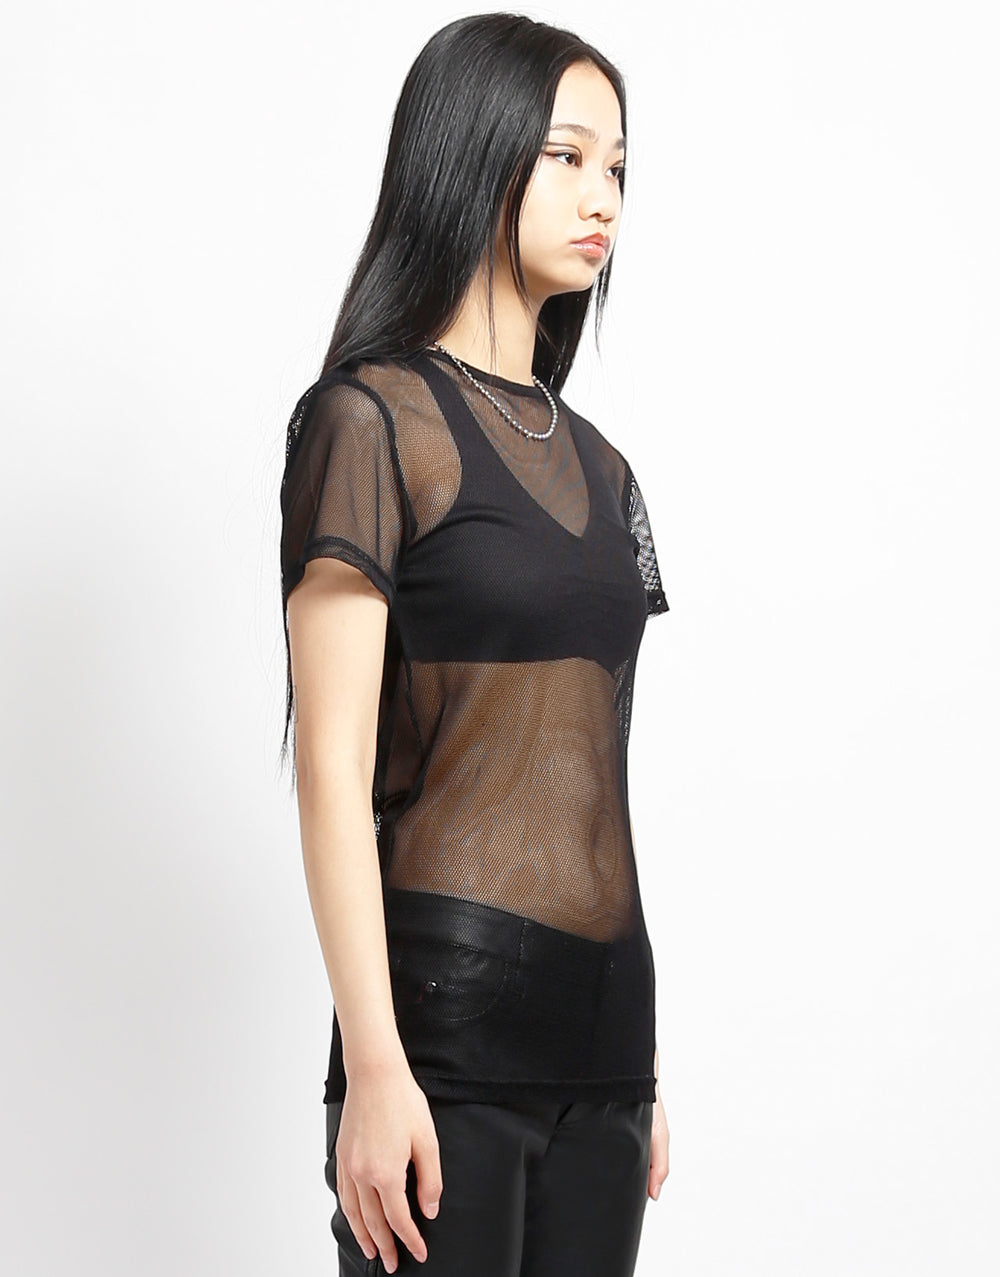 Model wearing the black Short Sleeve Fishnet T-Shirt with black bra and pants, front and right side view.